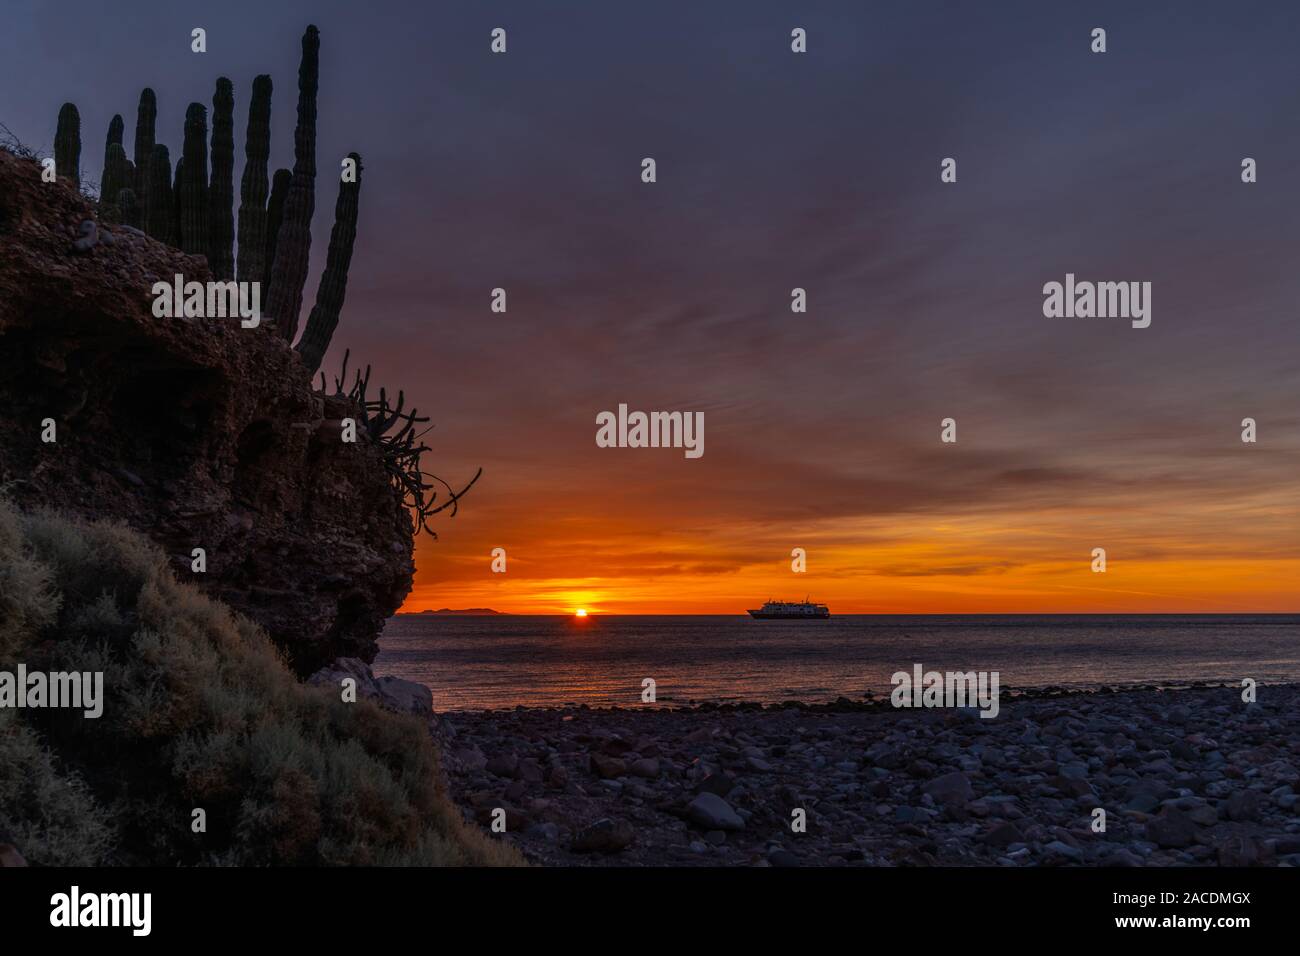 The sun peaks through a cardon cactus at sunrise at San Esteban Island with the ship National Geographic Venture at anchor in the Sea of Cortez. Stock Photo